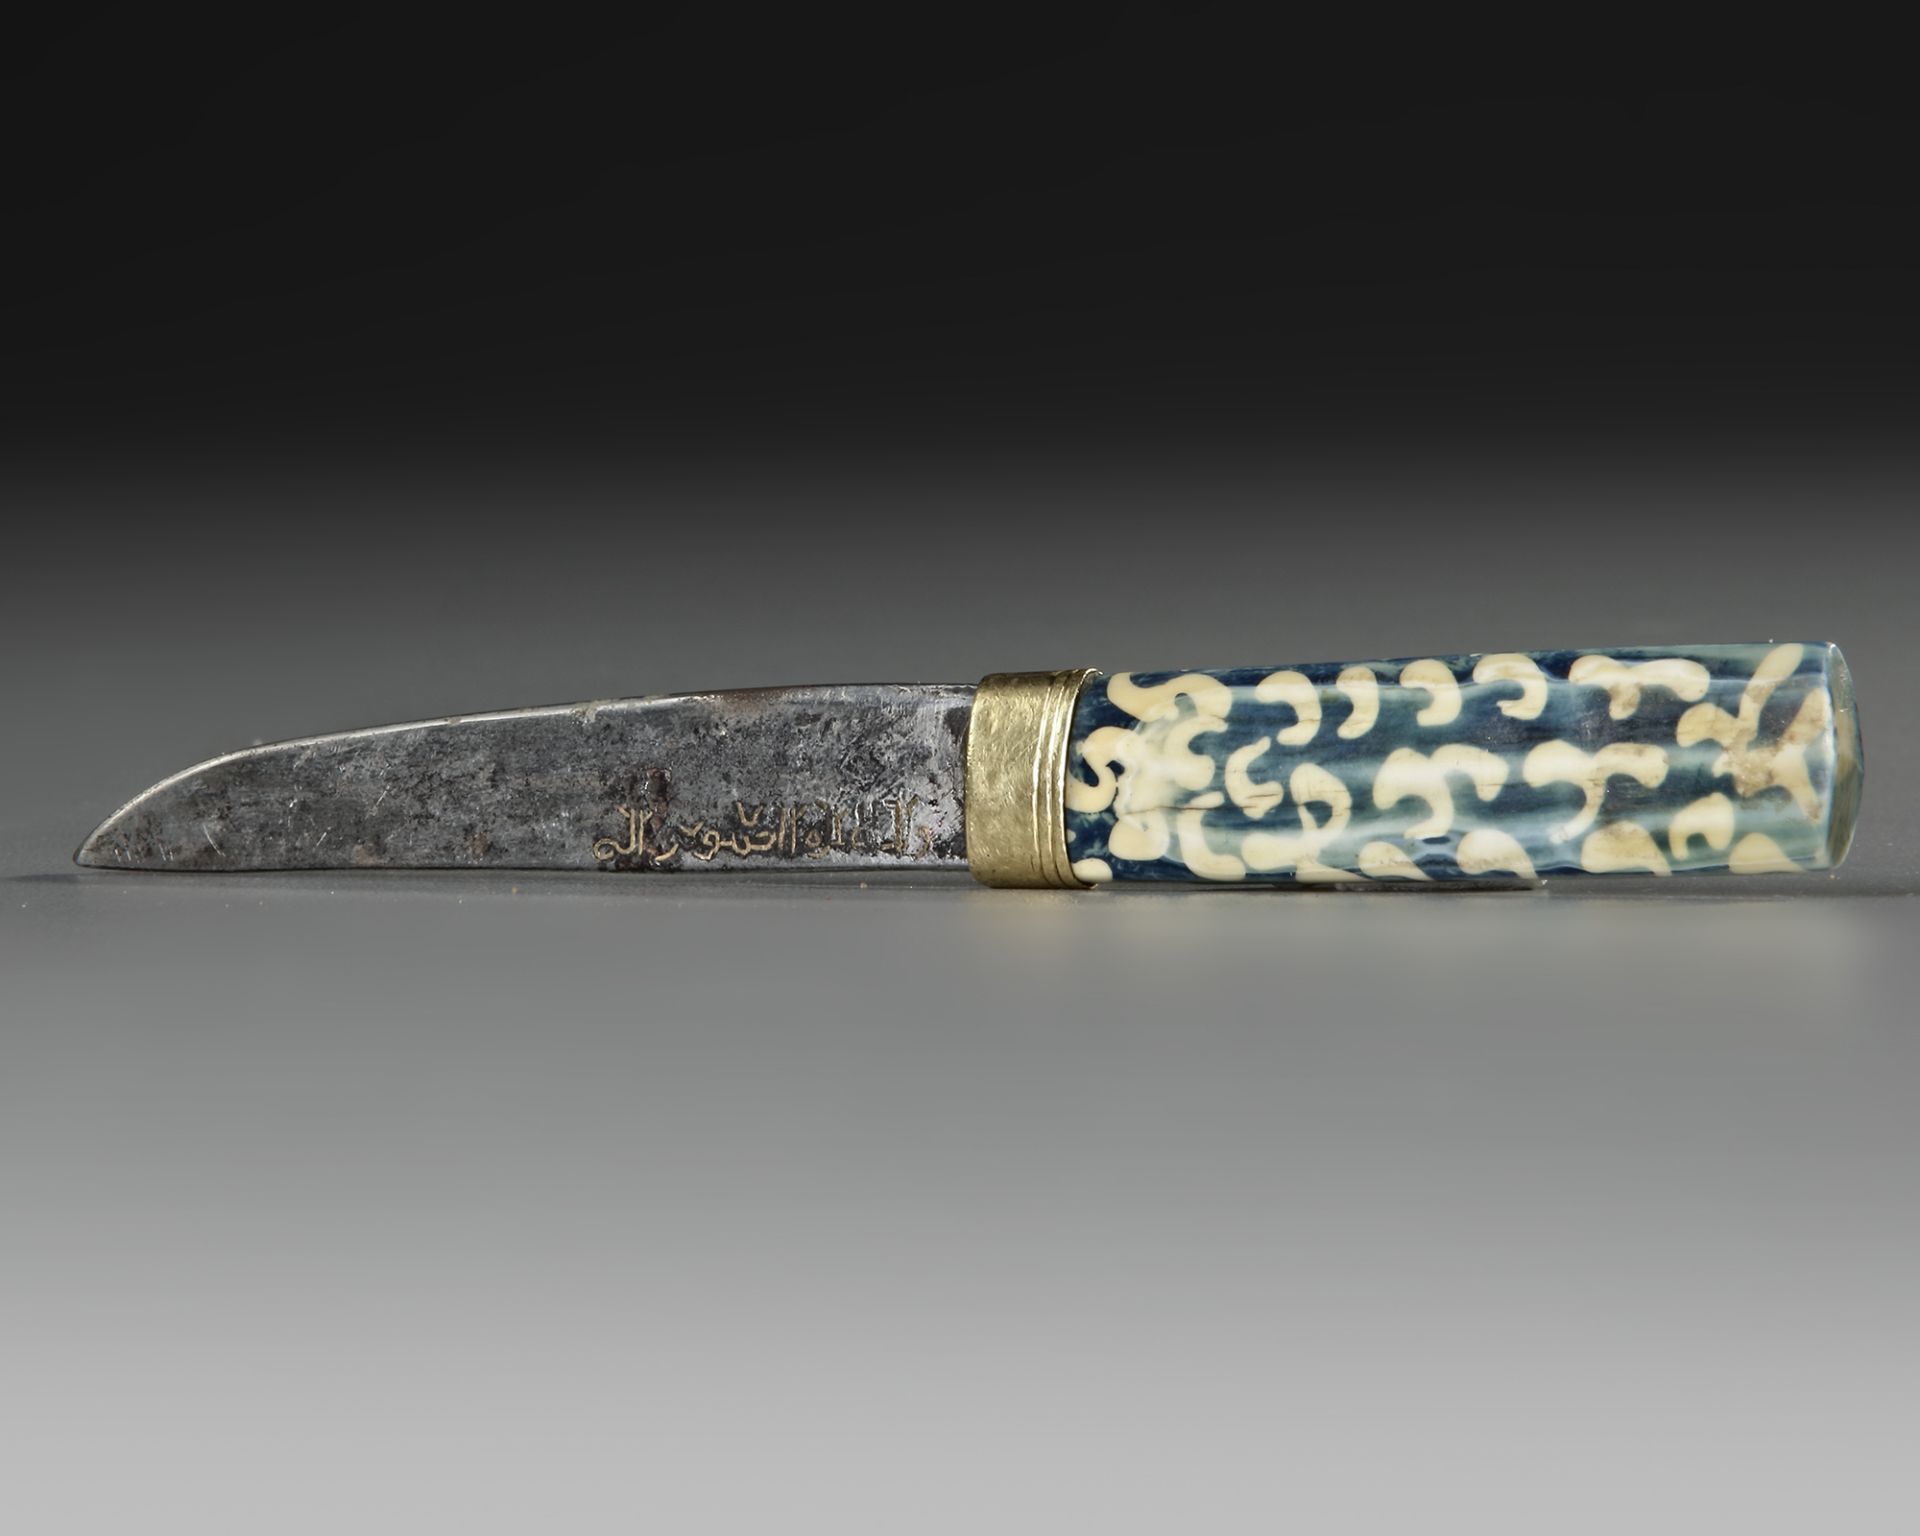 A SMALL INSCRIBED KNIFE, LATE TIMURID, 15TH-16TH CENTURY - Image 3 of 4